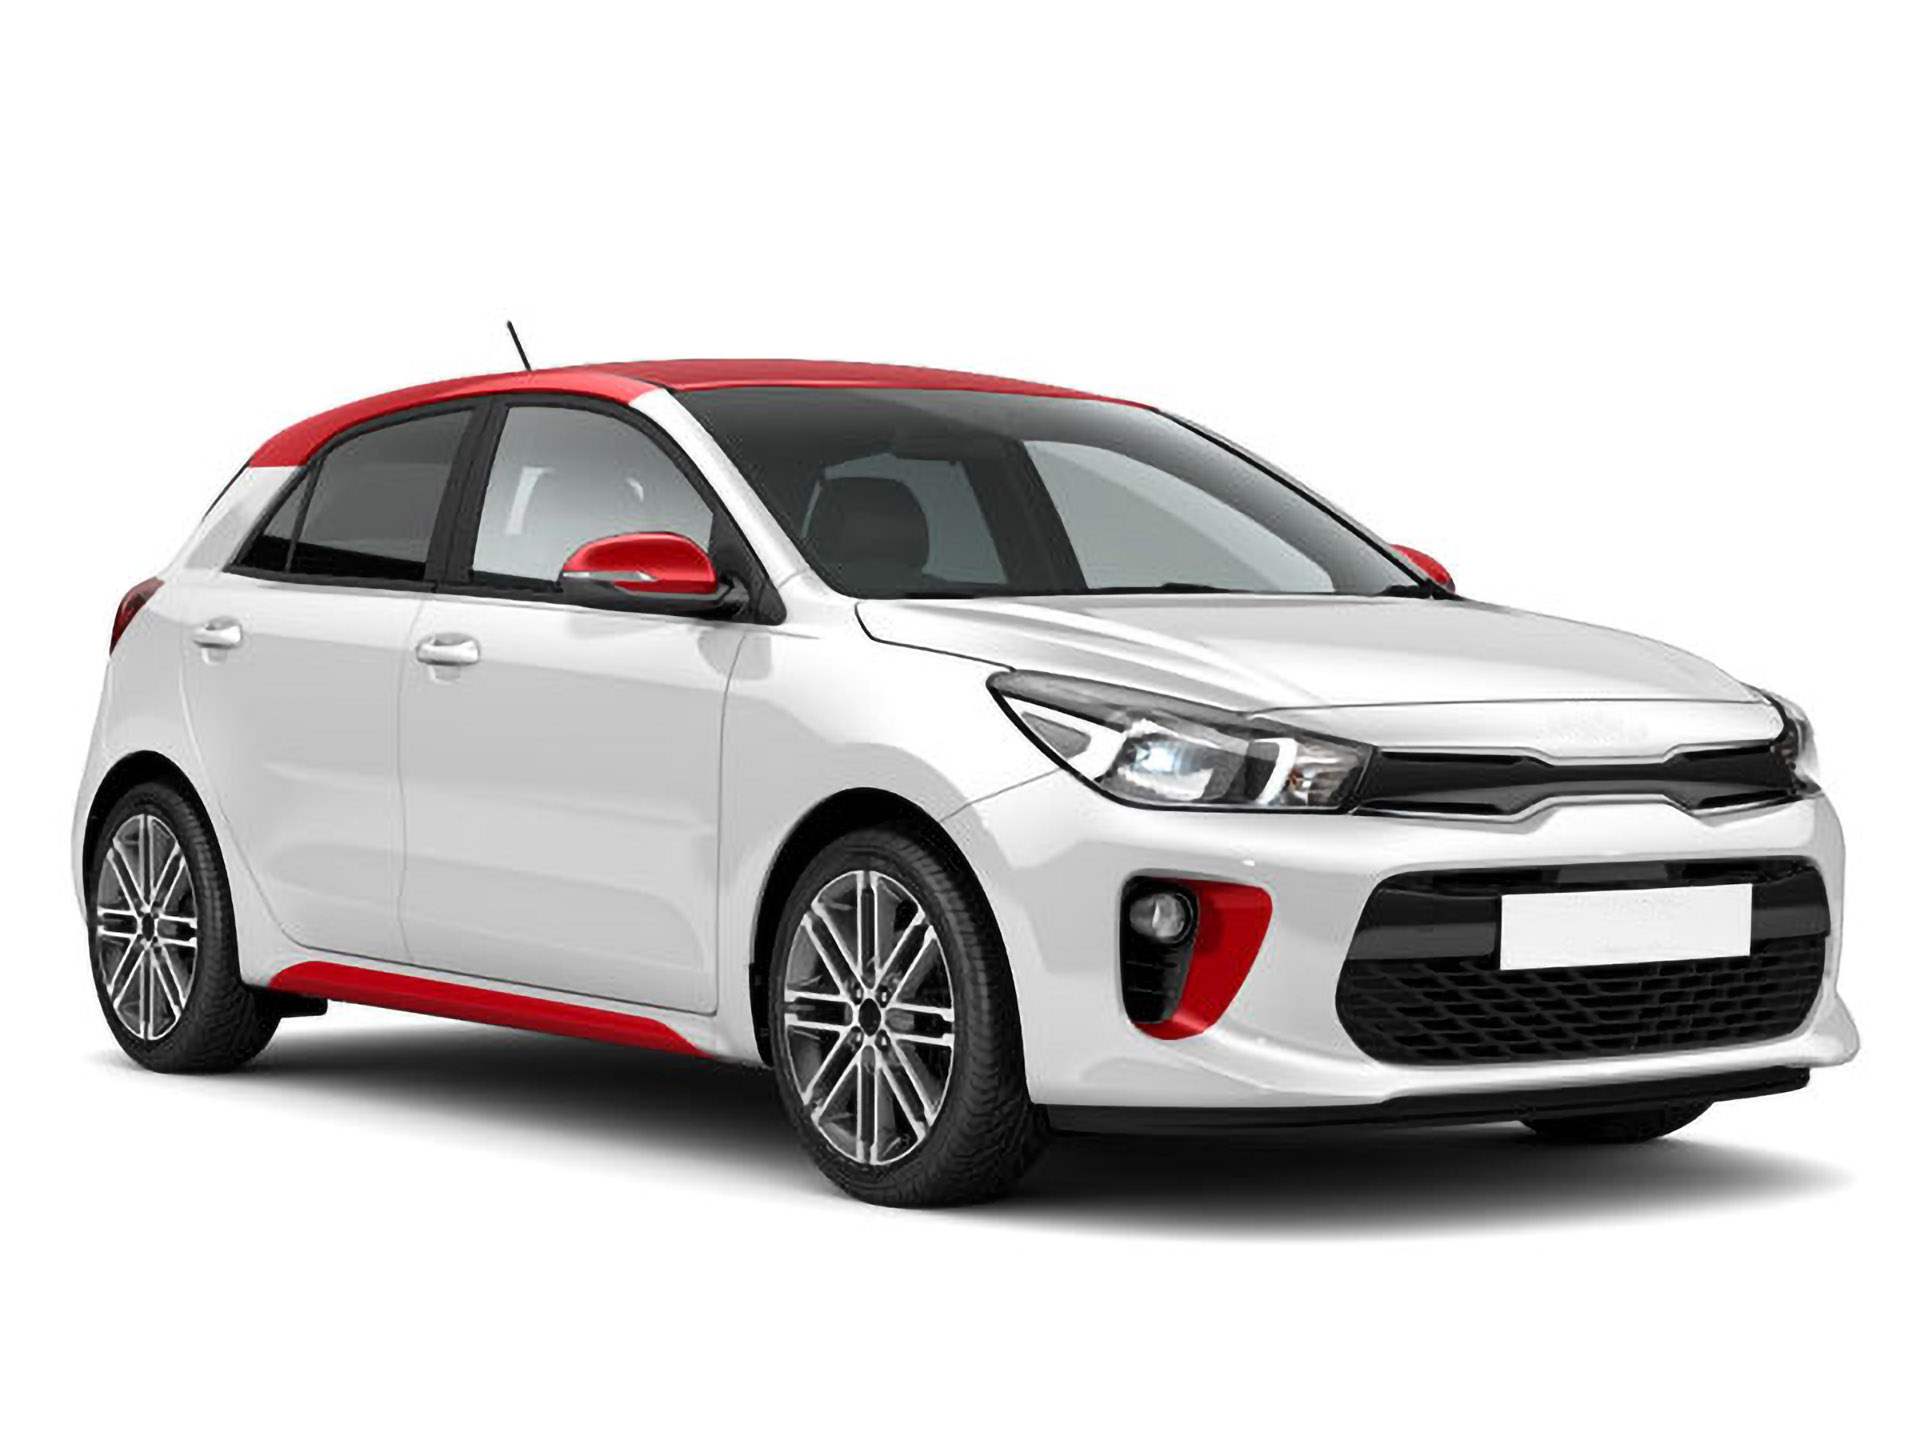 new-kia-rio-pulse-edition-launched-in-uk-1-20-1500556111